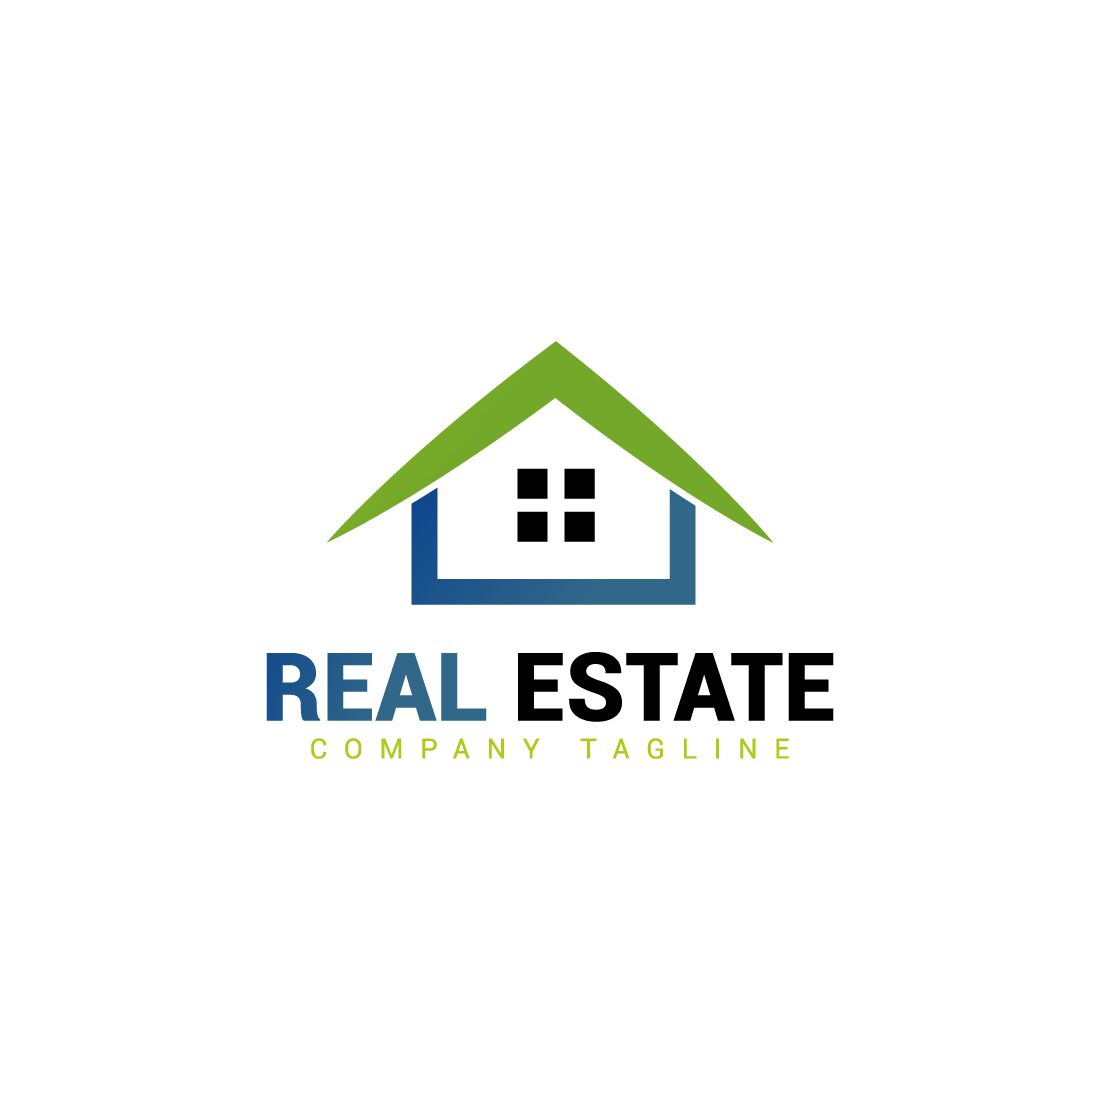 Real estate logo with green dark blue color cover image.